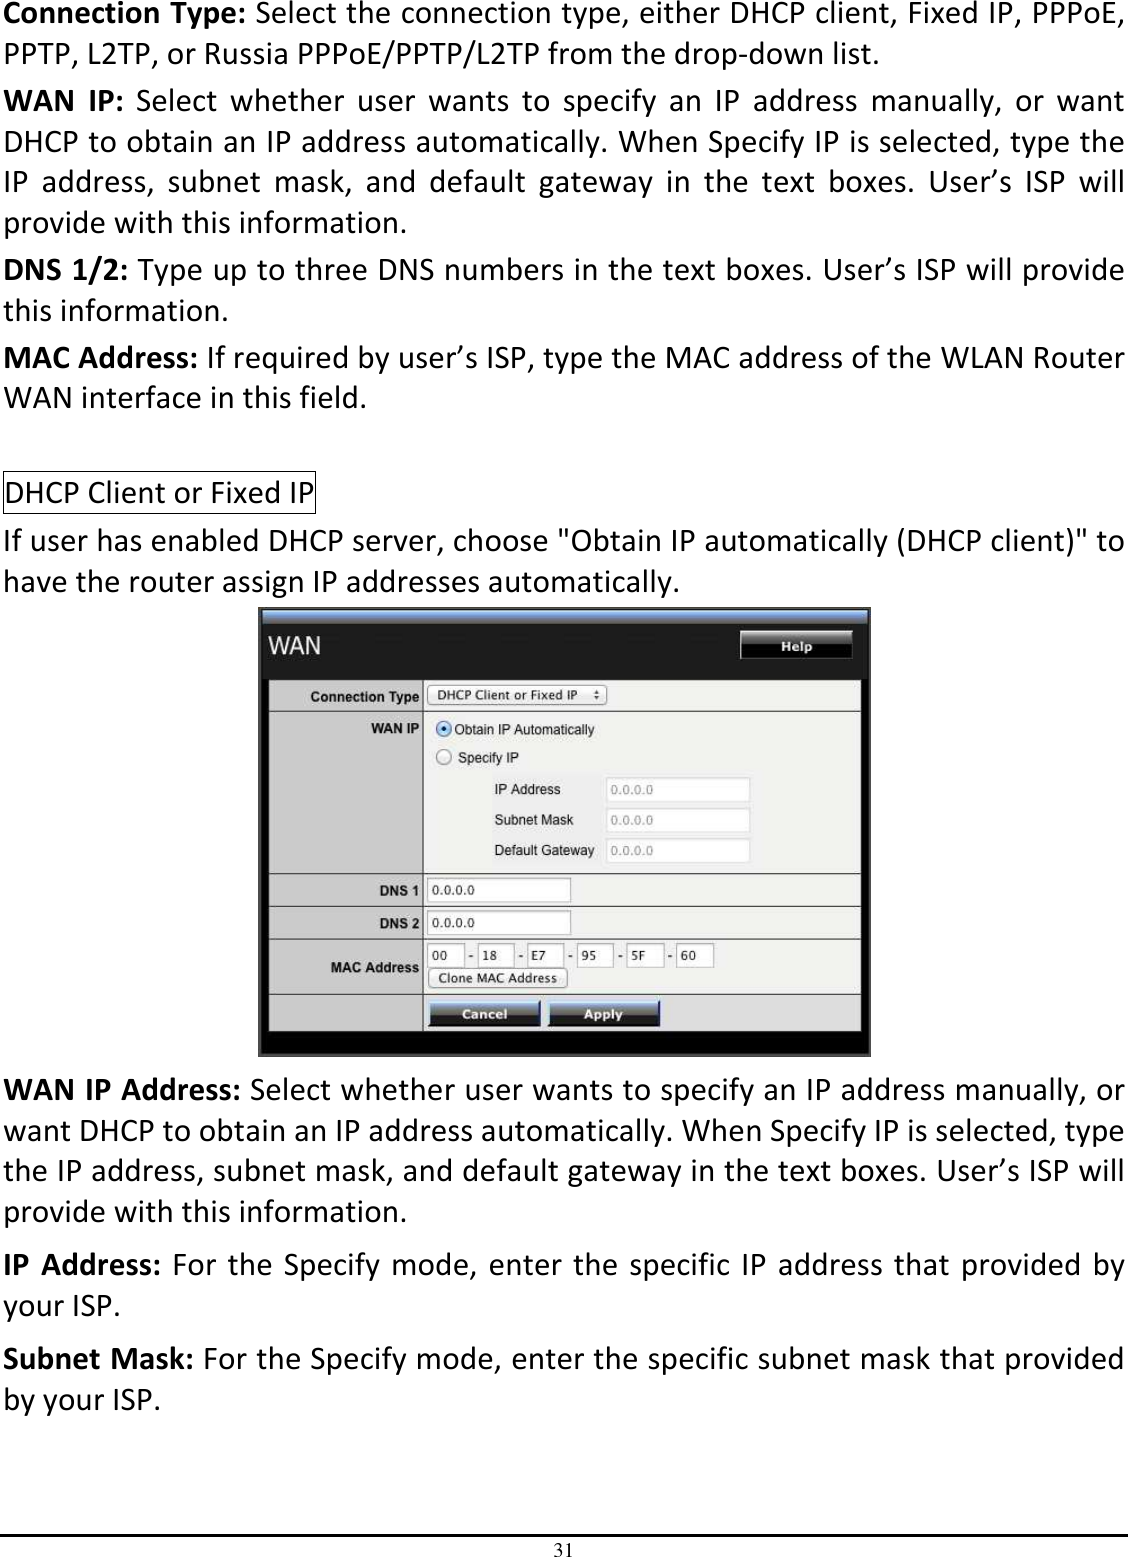 31 Connection Type: Select the connection type, either DHCP client, Fixed IP, PPPoE, PPTP, L2TP, or Russia PPPoE/PPTP/L2TP from the drop-down list. WAN  IP:  Select  whether  user  wants  to  specify  an  IP  address  manually,  or  want DHCP to obtain an IP address automatically. When Specify IP is selected, type the IP  address,  subnet  mask,  and  default  gateway  in  the  text  boxes.  User’s  ISP  will provide with this information. DNS 1/2: Type up to three DNS numbers in the text boxes. User’s ISP will provide this information. MAC Address: If required by user’s ISP, type the MAC address of the WLAN Router WAN interface in this field.  DHCP Client or Fixed IP If user has enabled DHCP server, choose &quot;Obtain IP automatically (DHCP client)&quot; to have the router assign IP addresses automatically.  WAN IP Address: Select whether user wants to specify an IP address manually, or want DHCP to obtain an IP address automatically. When Specify IP is selected, type the IP address, subnet mask, and default gateway in the text boxes. User’s ISP will provide with this information. IP  Address: For the Specify mode, enter the specific IP address that provided by your ISP. Subnet Mask: For the Specify mode, enter the specific subnet mask that provided by your ISP. 